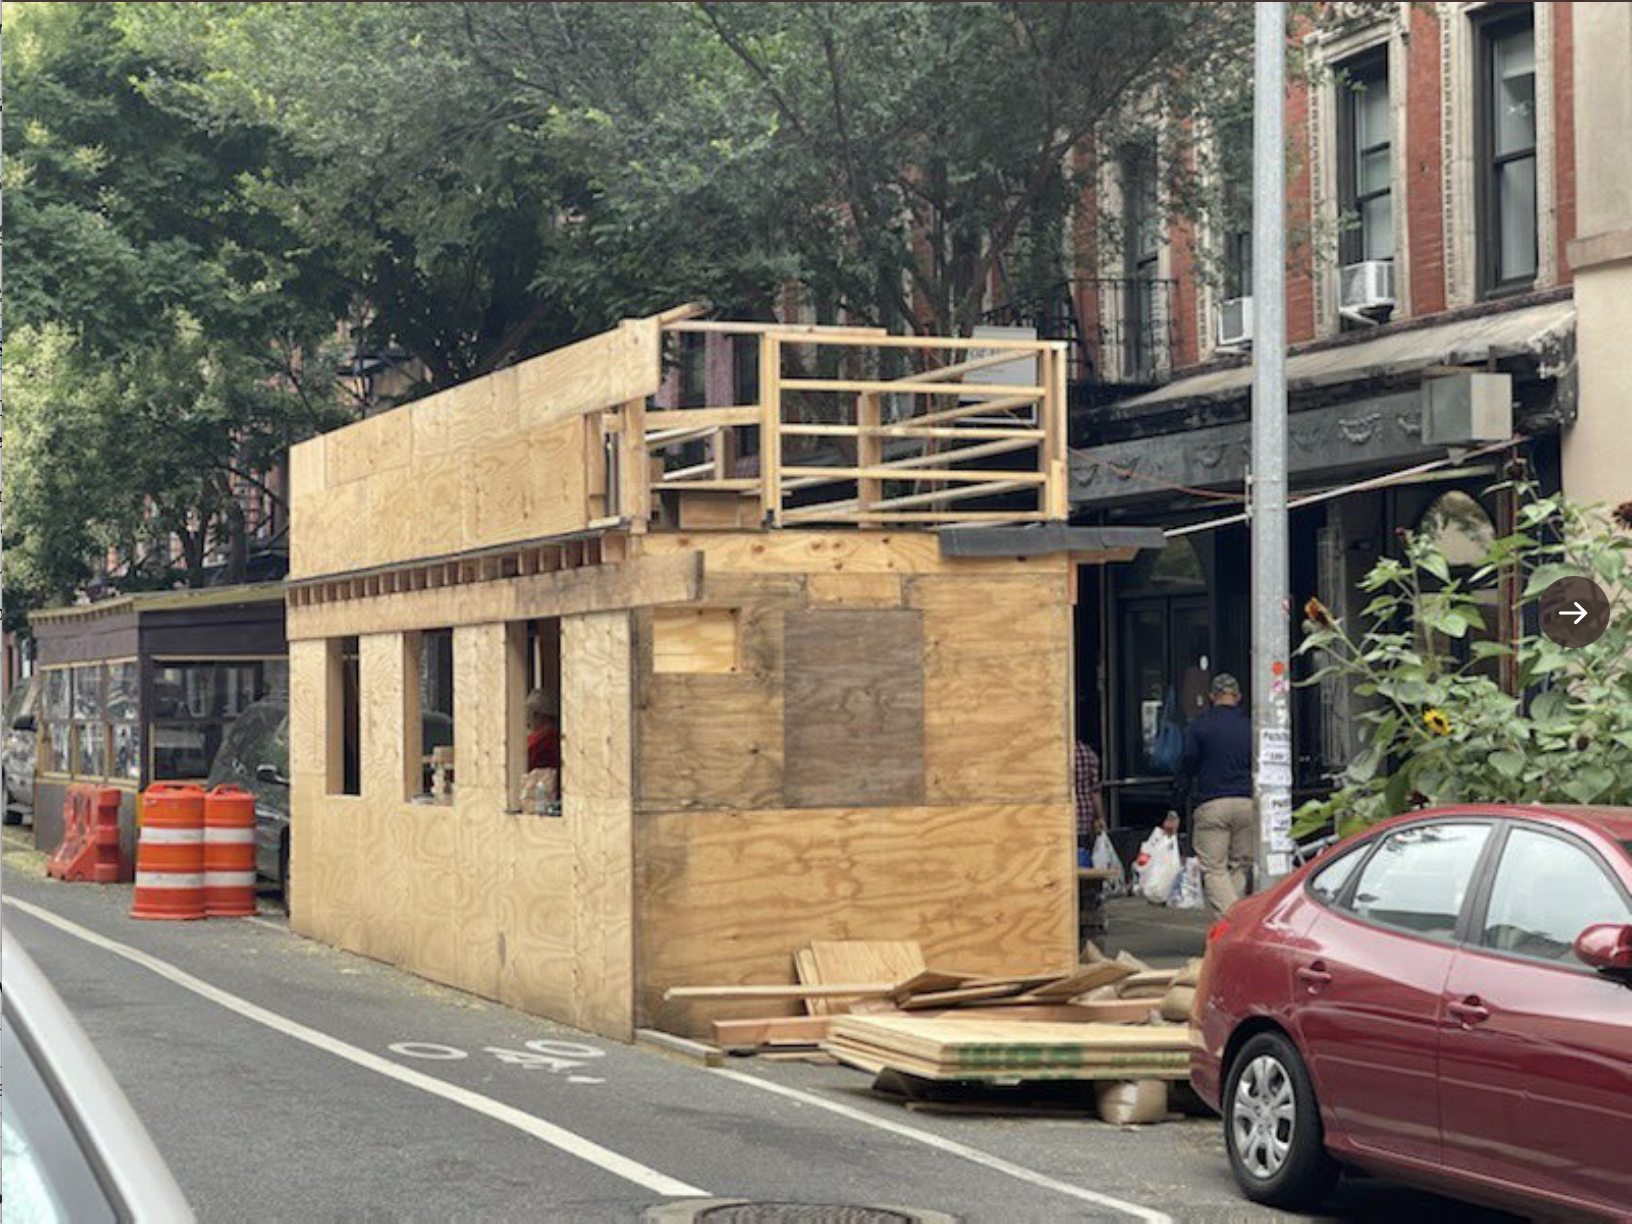 A photo shows a two-story outdoor dining shed under construction in NYC's Lower East Side.